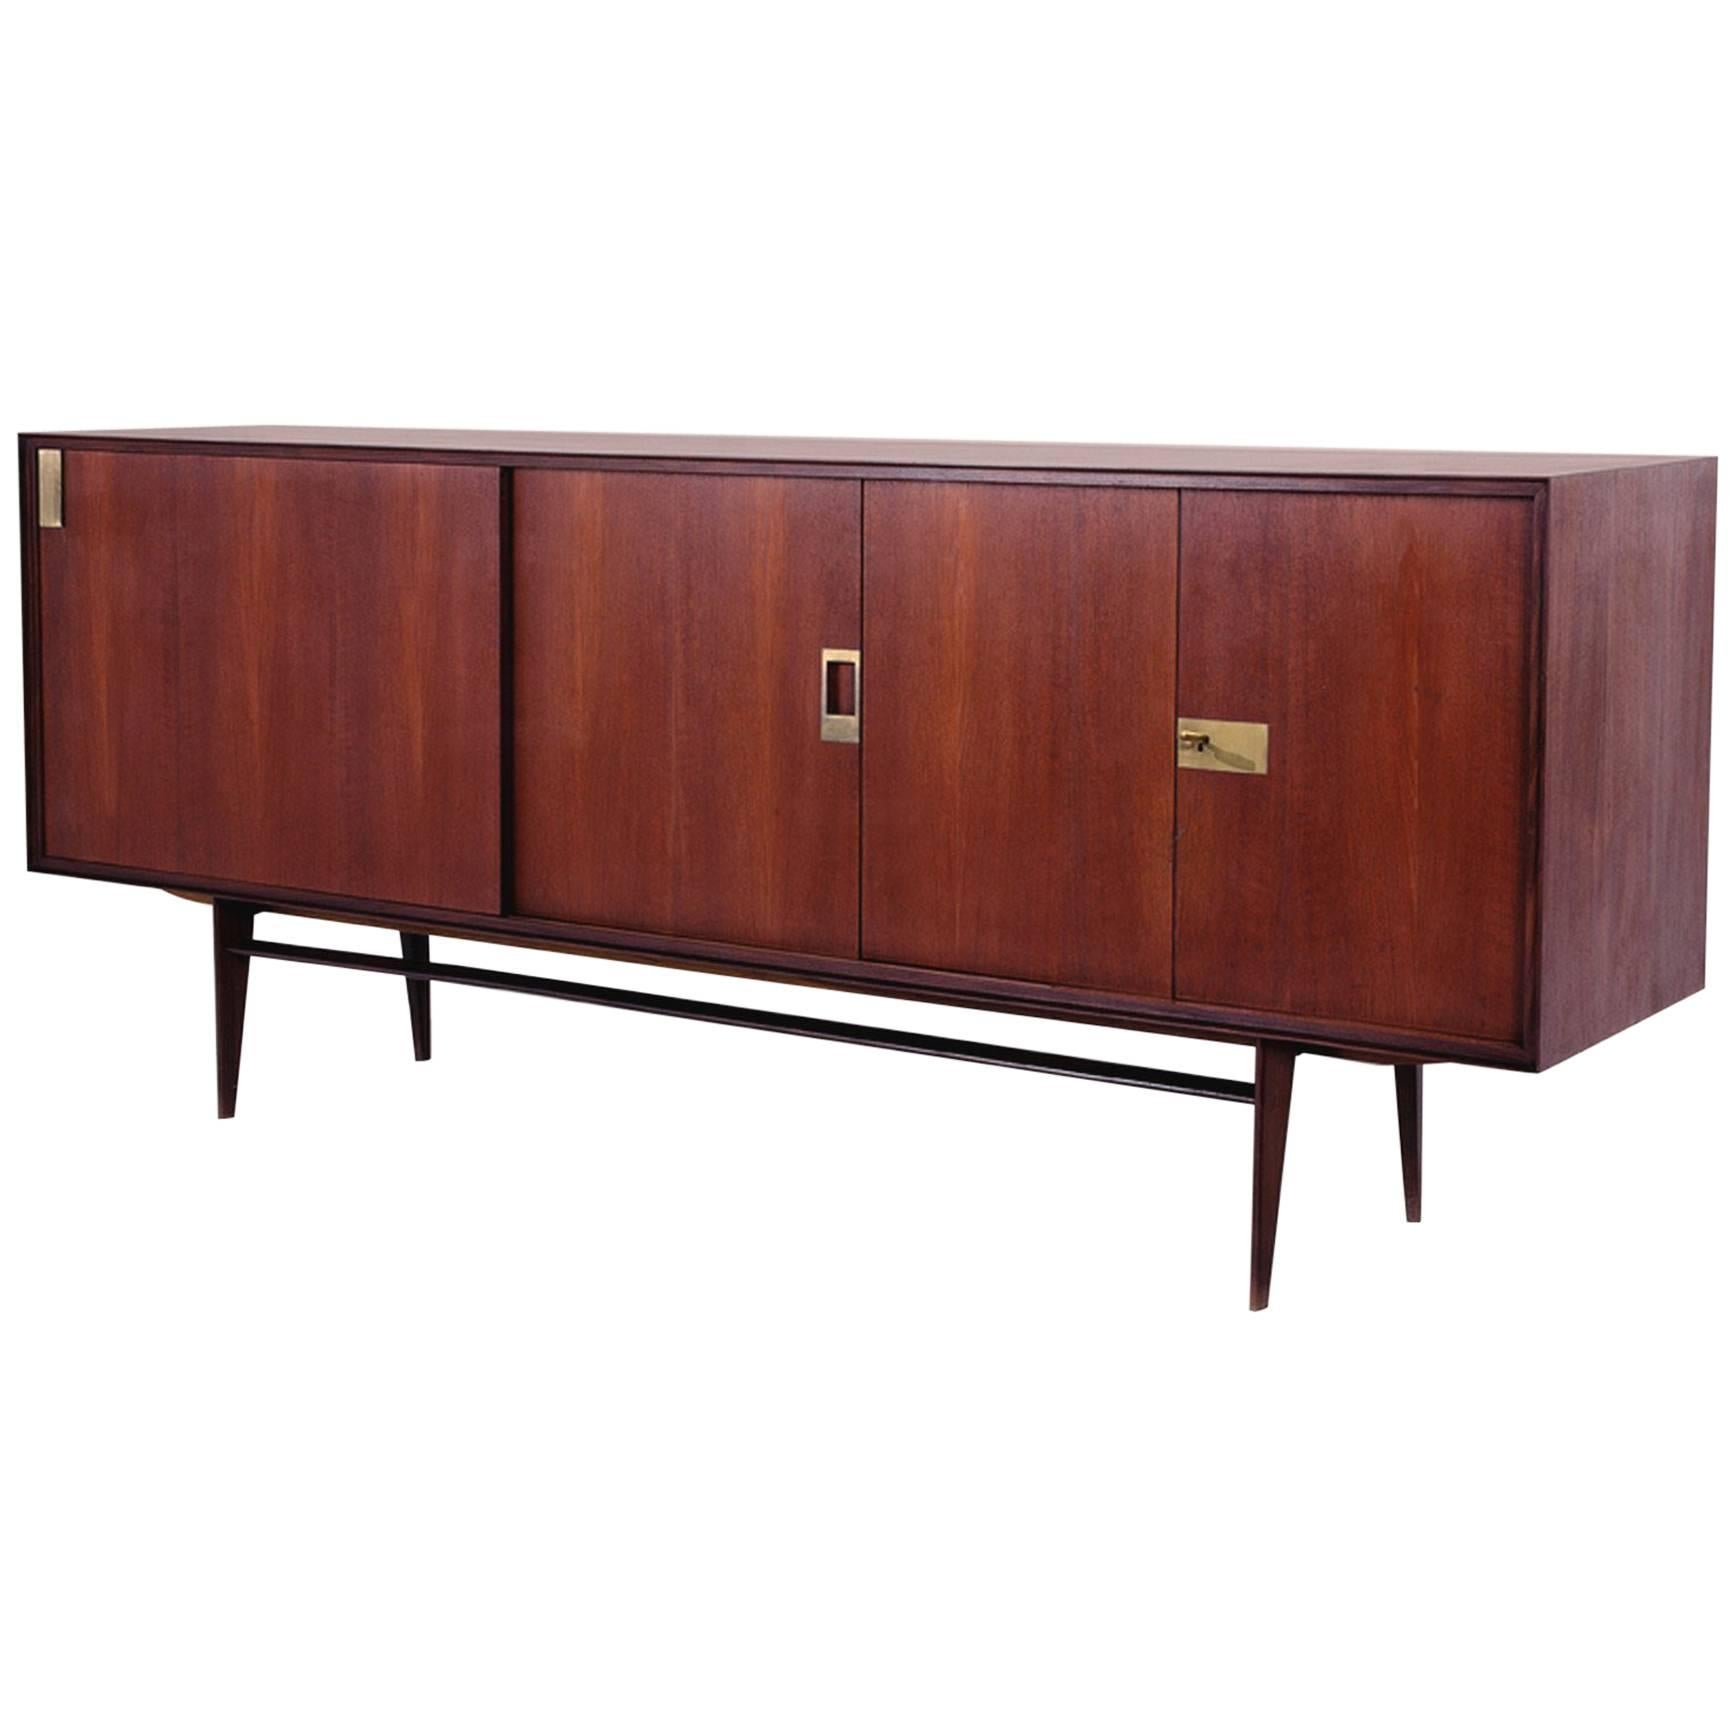 Sideboard with Brass Details by Palutari for Dassi, Italy, 1950s